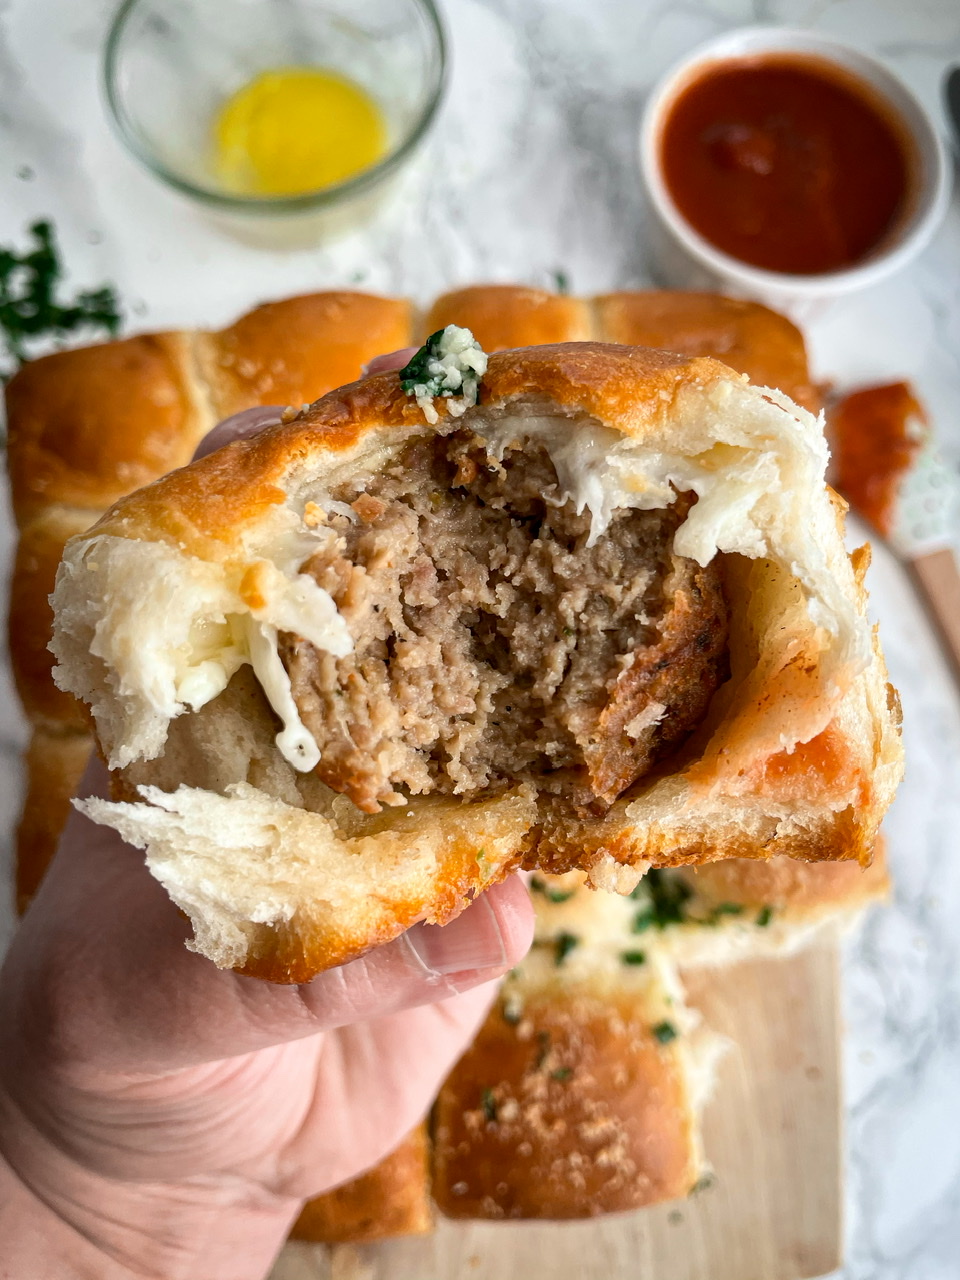 Cheesy Meatball Stuffed Biscuits | A quick and Delicious Meal